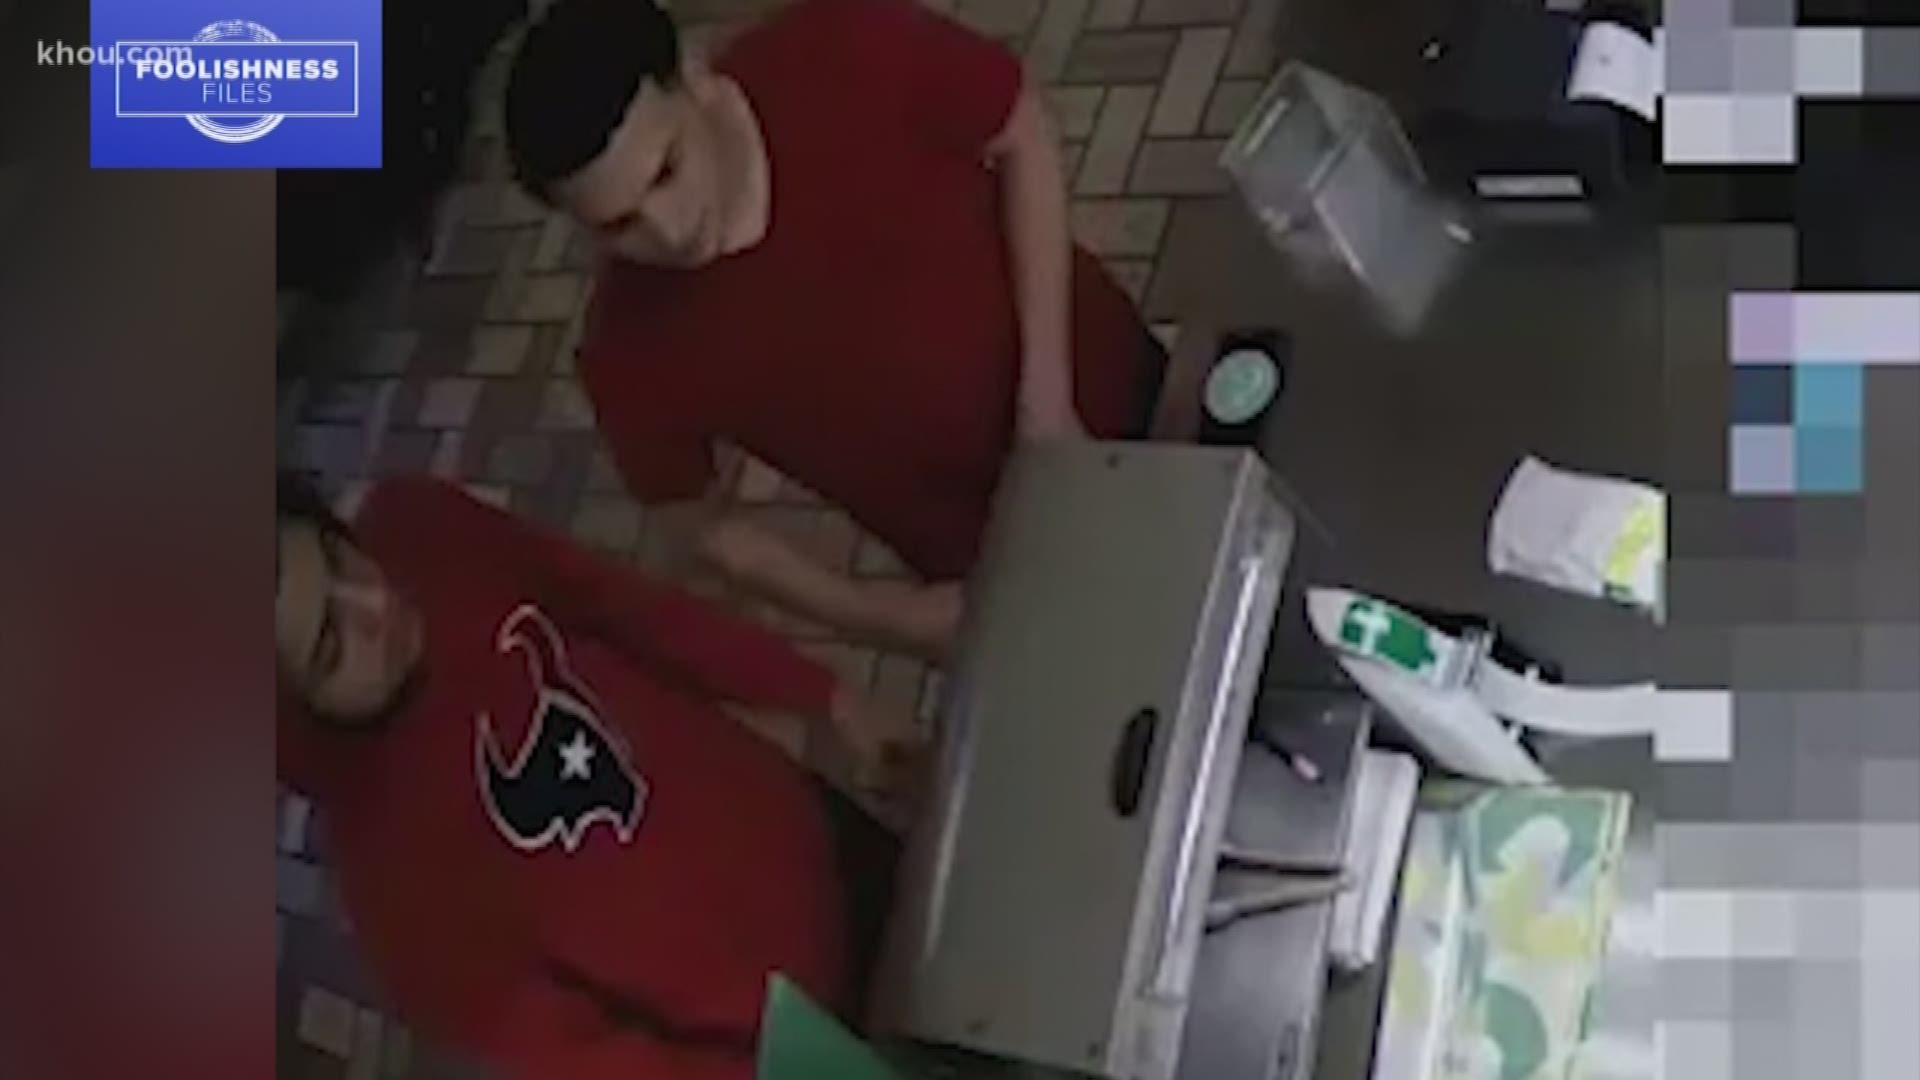 It's the attack of the cookie thief! We can't make this stuff up, folks. Surveillance cameras captured two men walking into a Subway restaurant off I-45 and Monroe in southeast Houston. What happens next may surprise you.